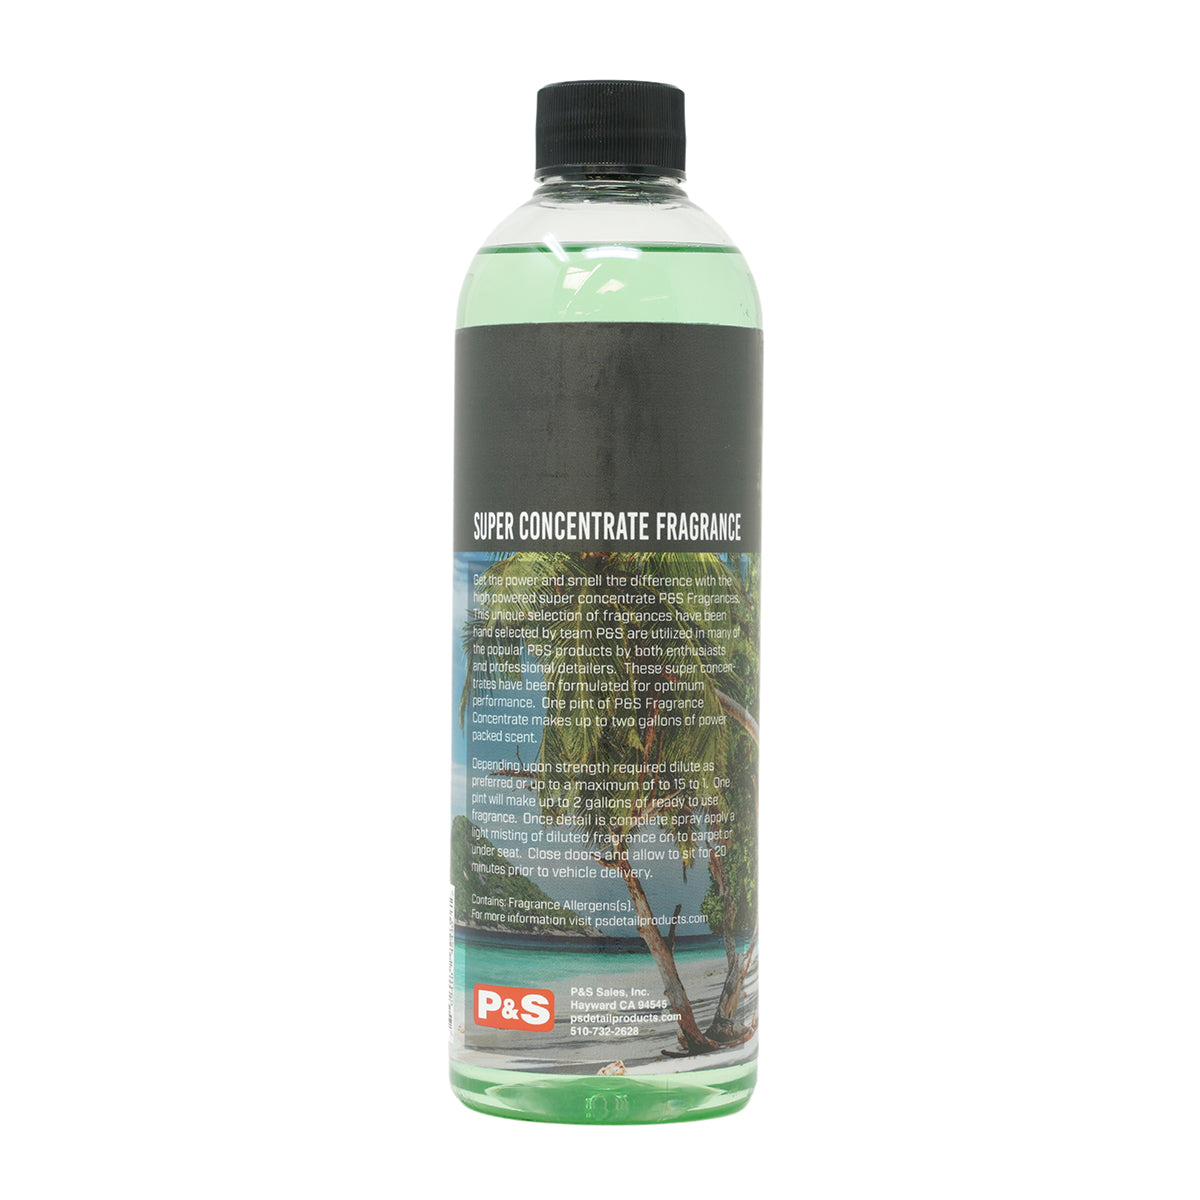 P&S Coconut Lime Air Freshener (Absolute Essence) Concentrate 473ml